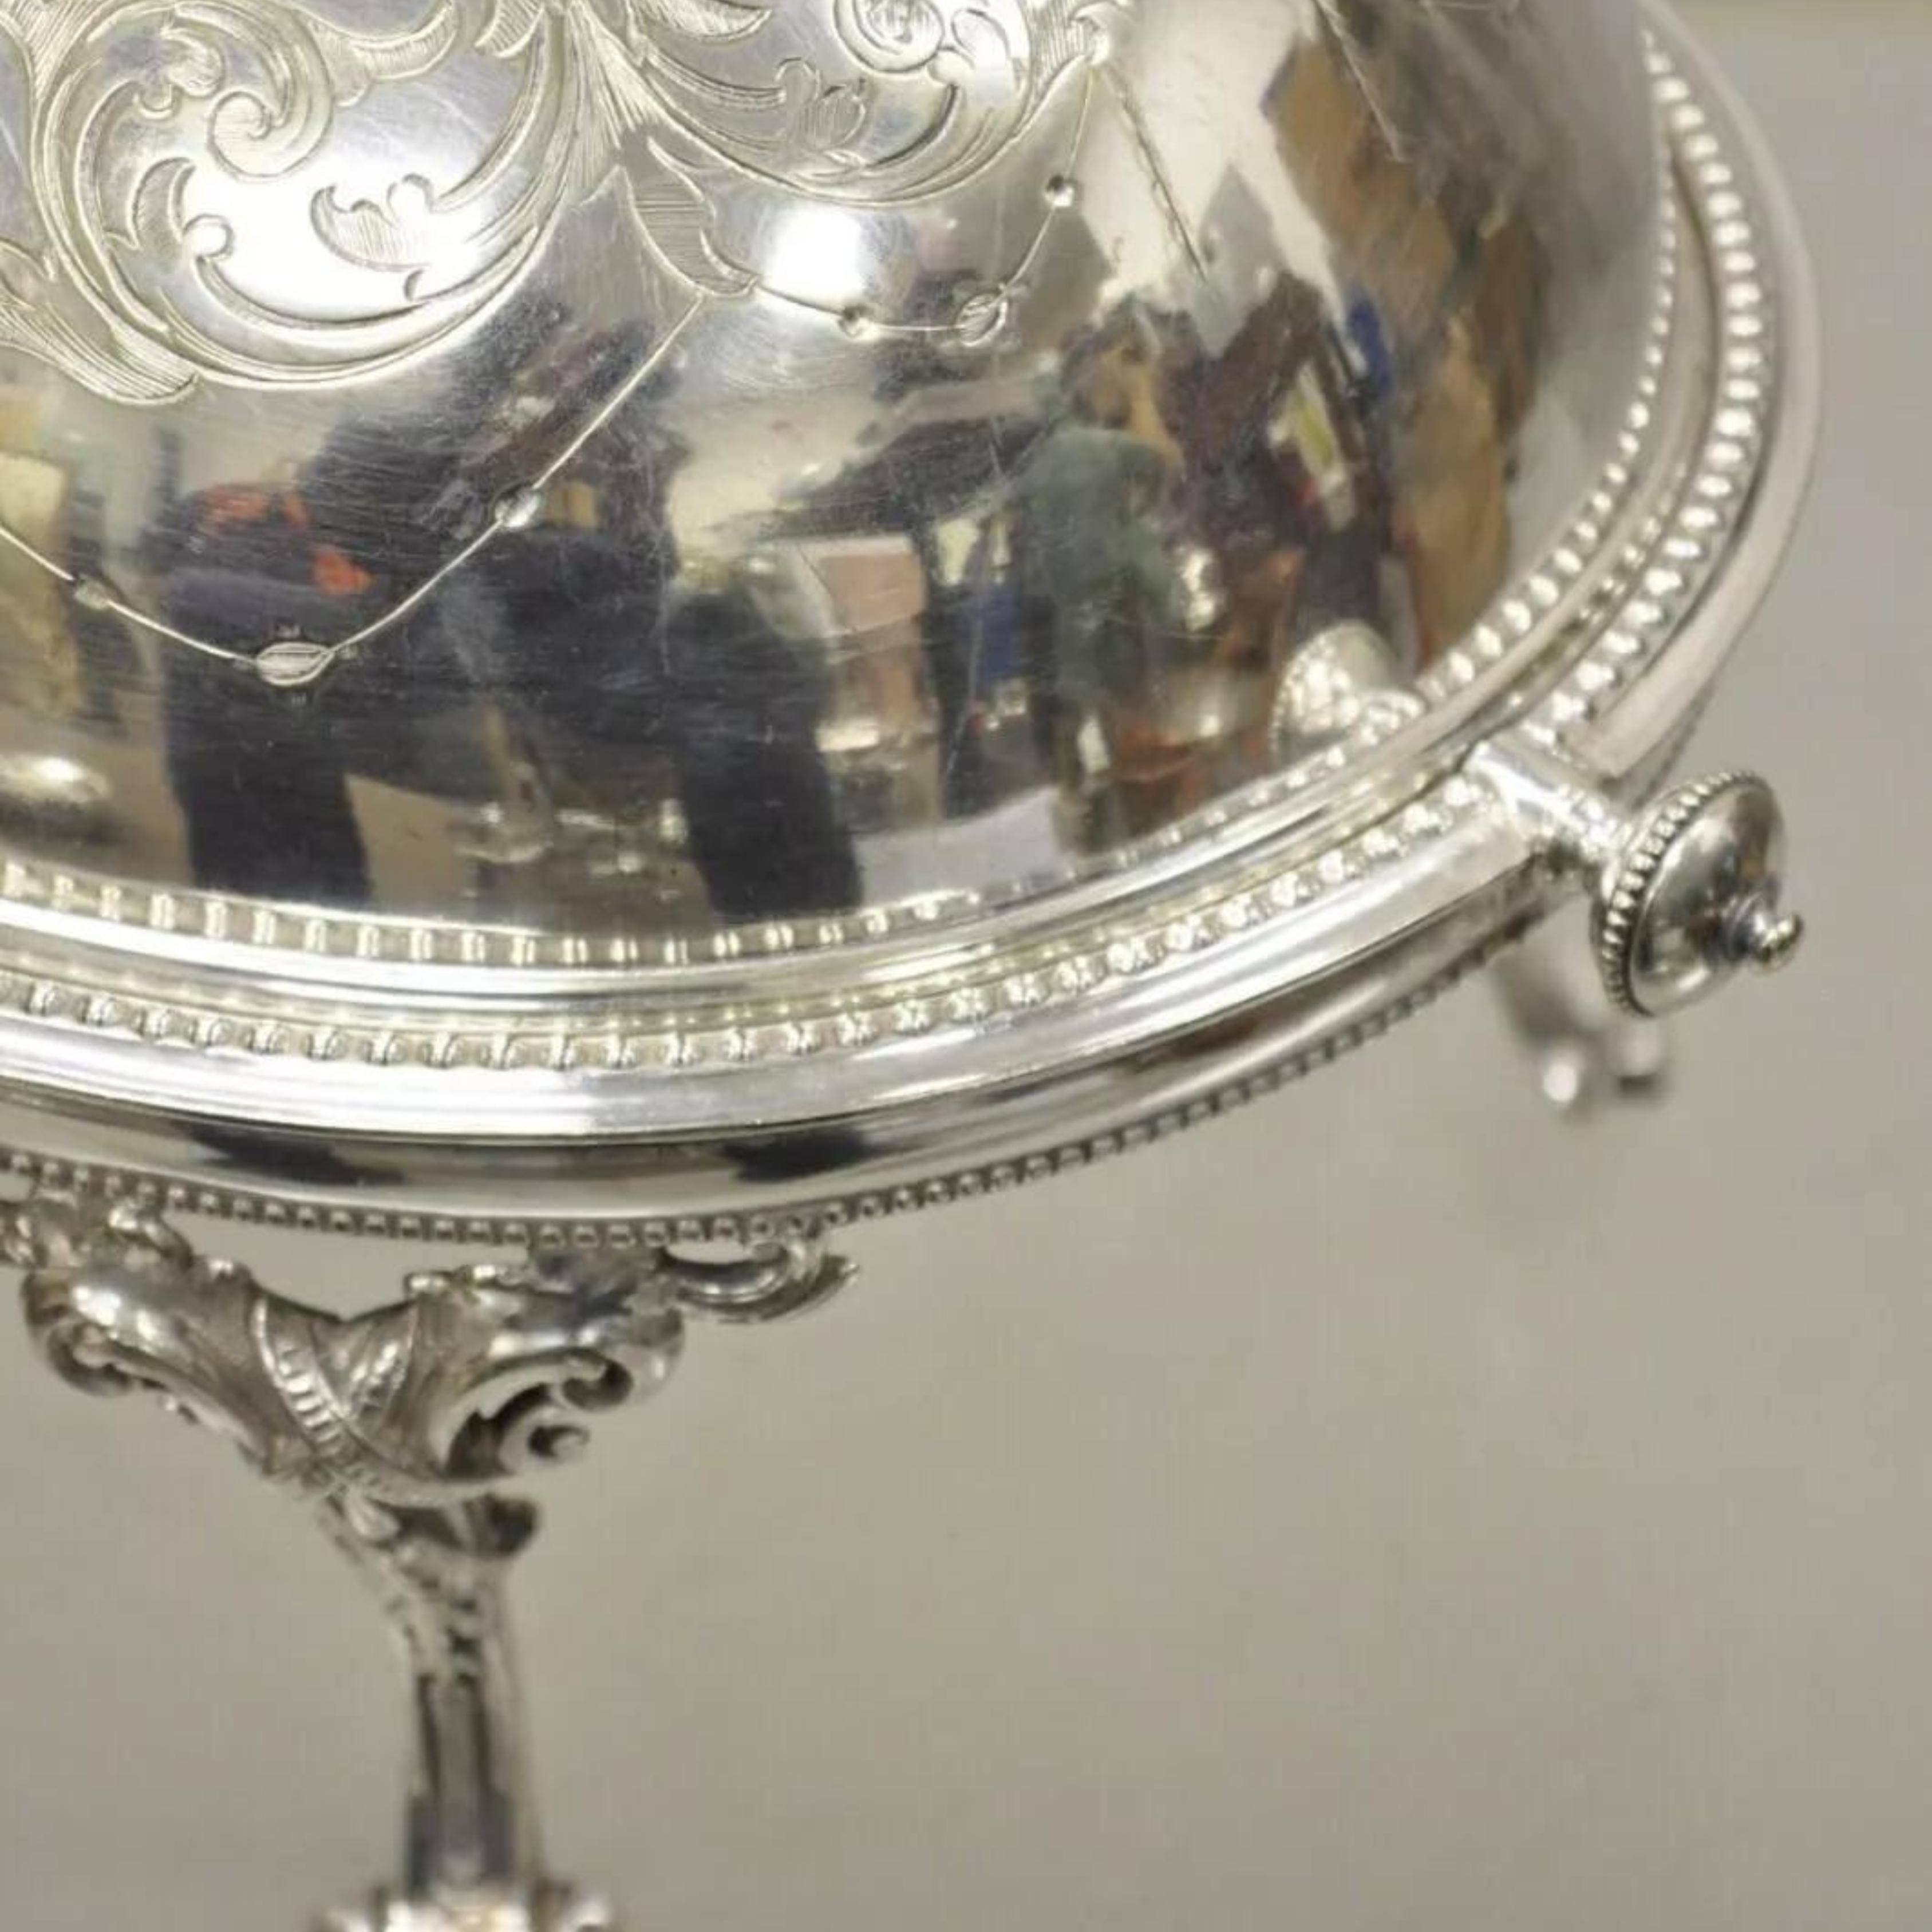 Antique Edwardian Silver Plated Revolving Dome Oval Chafing Dish Food Warmer For Sale 3